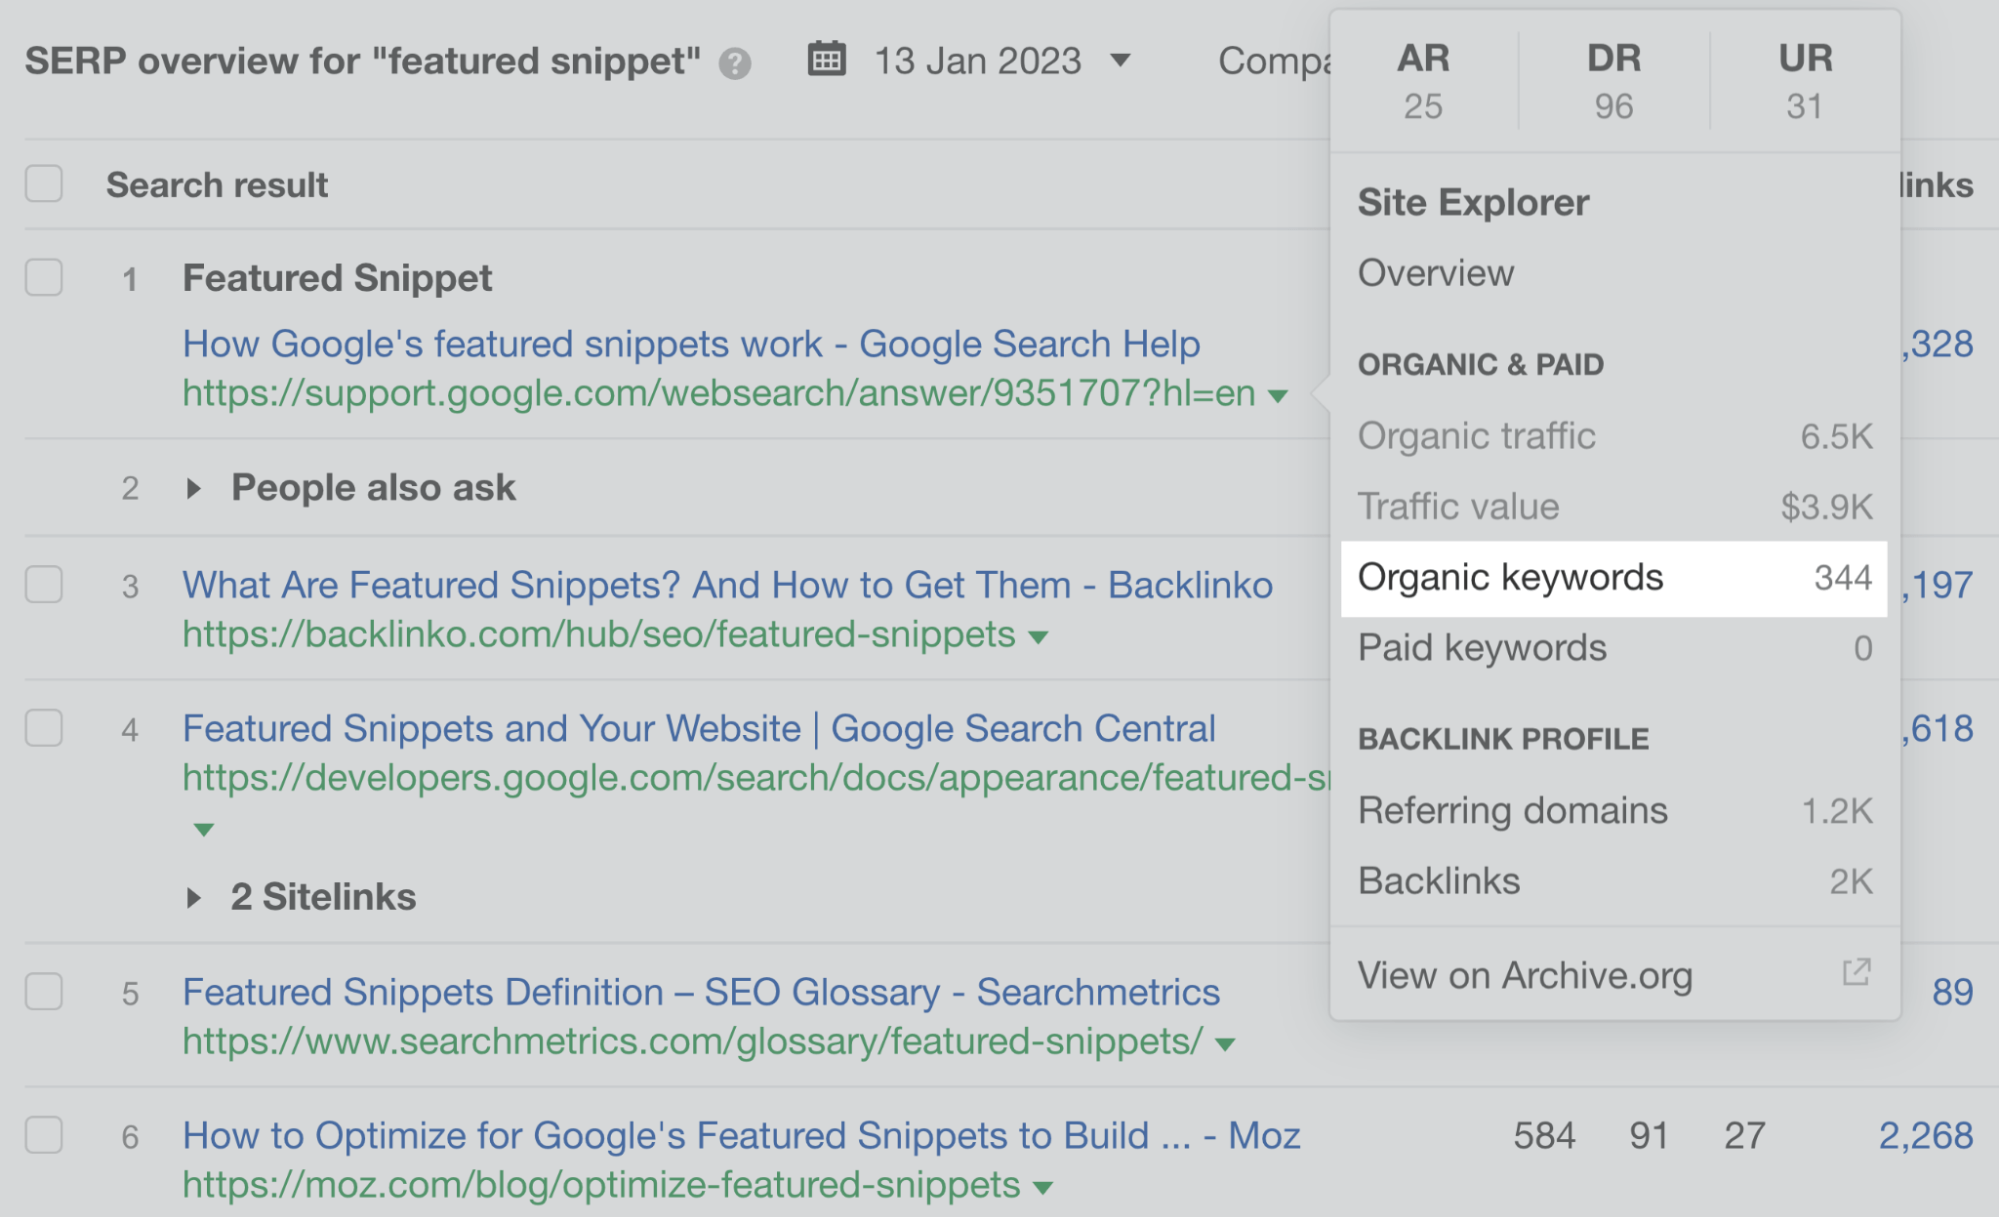 Checking organic keywords of the top-ranking page